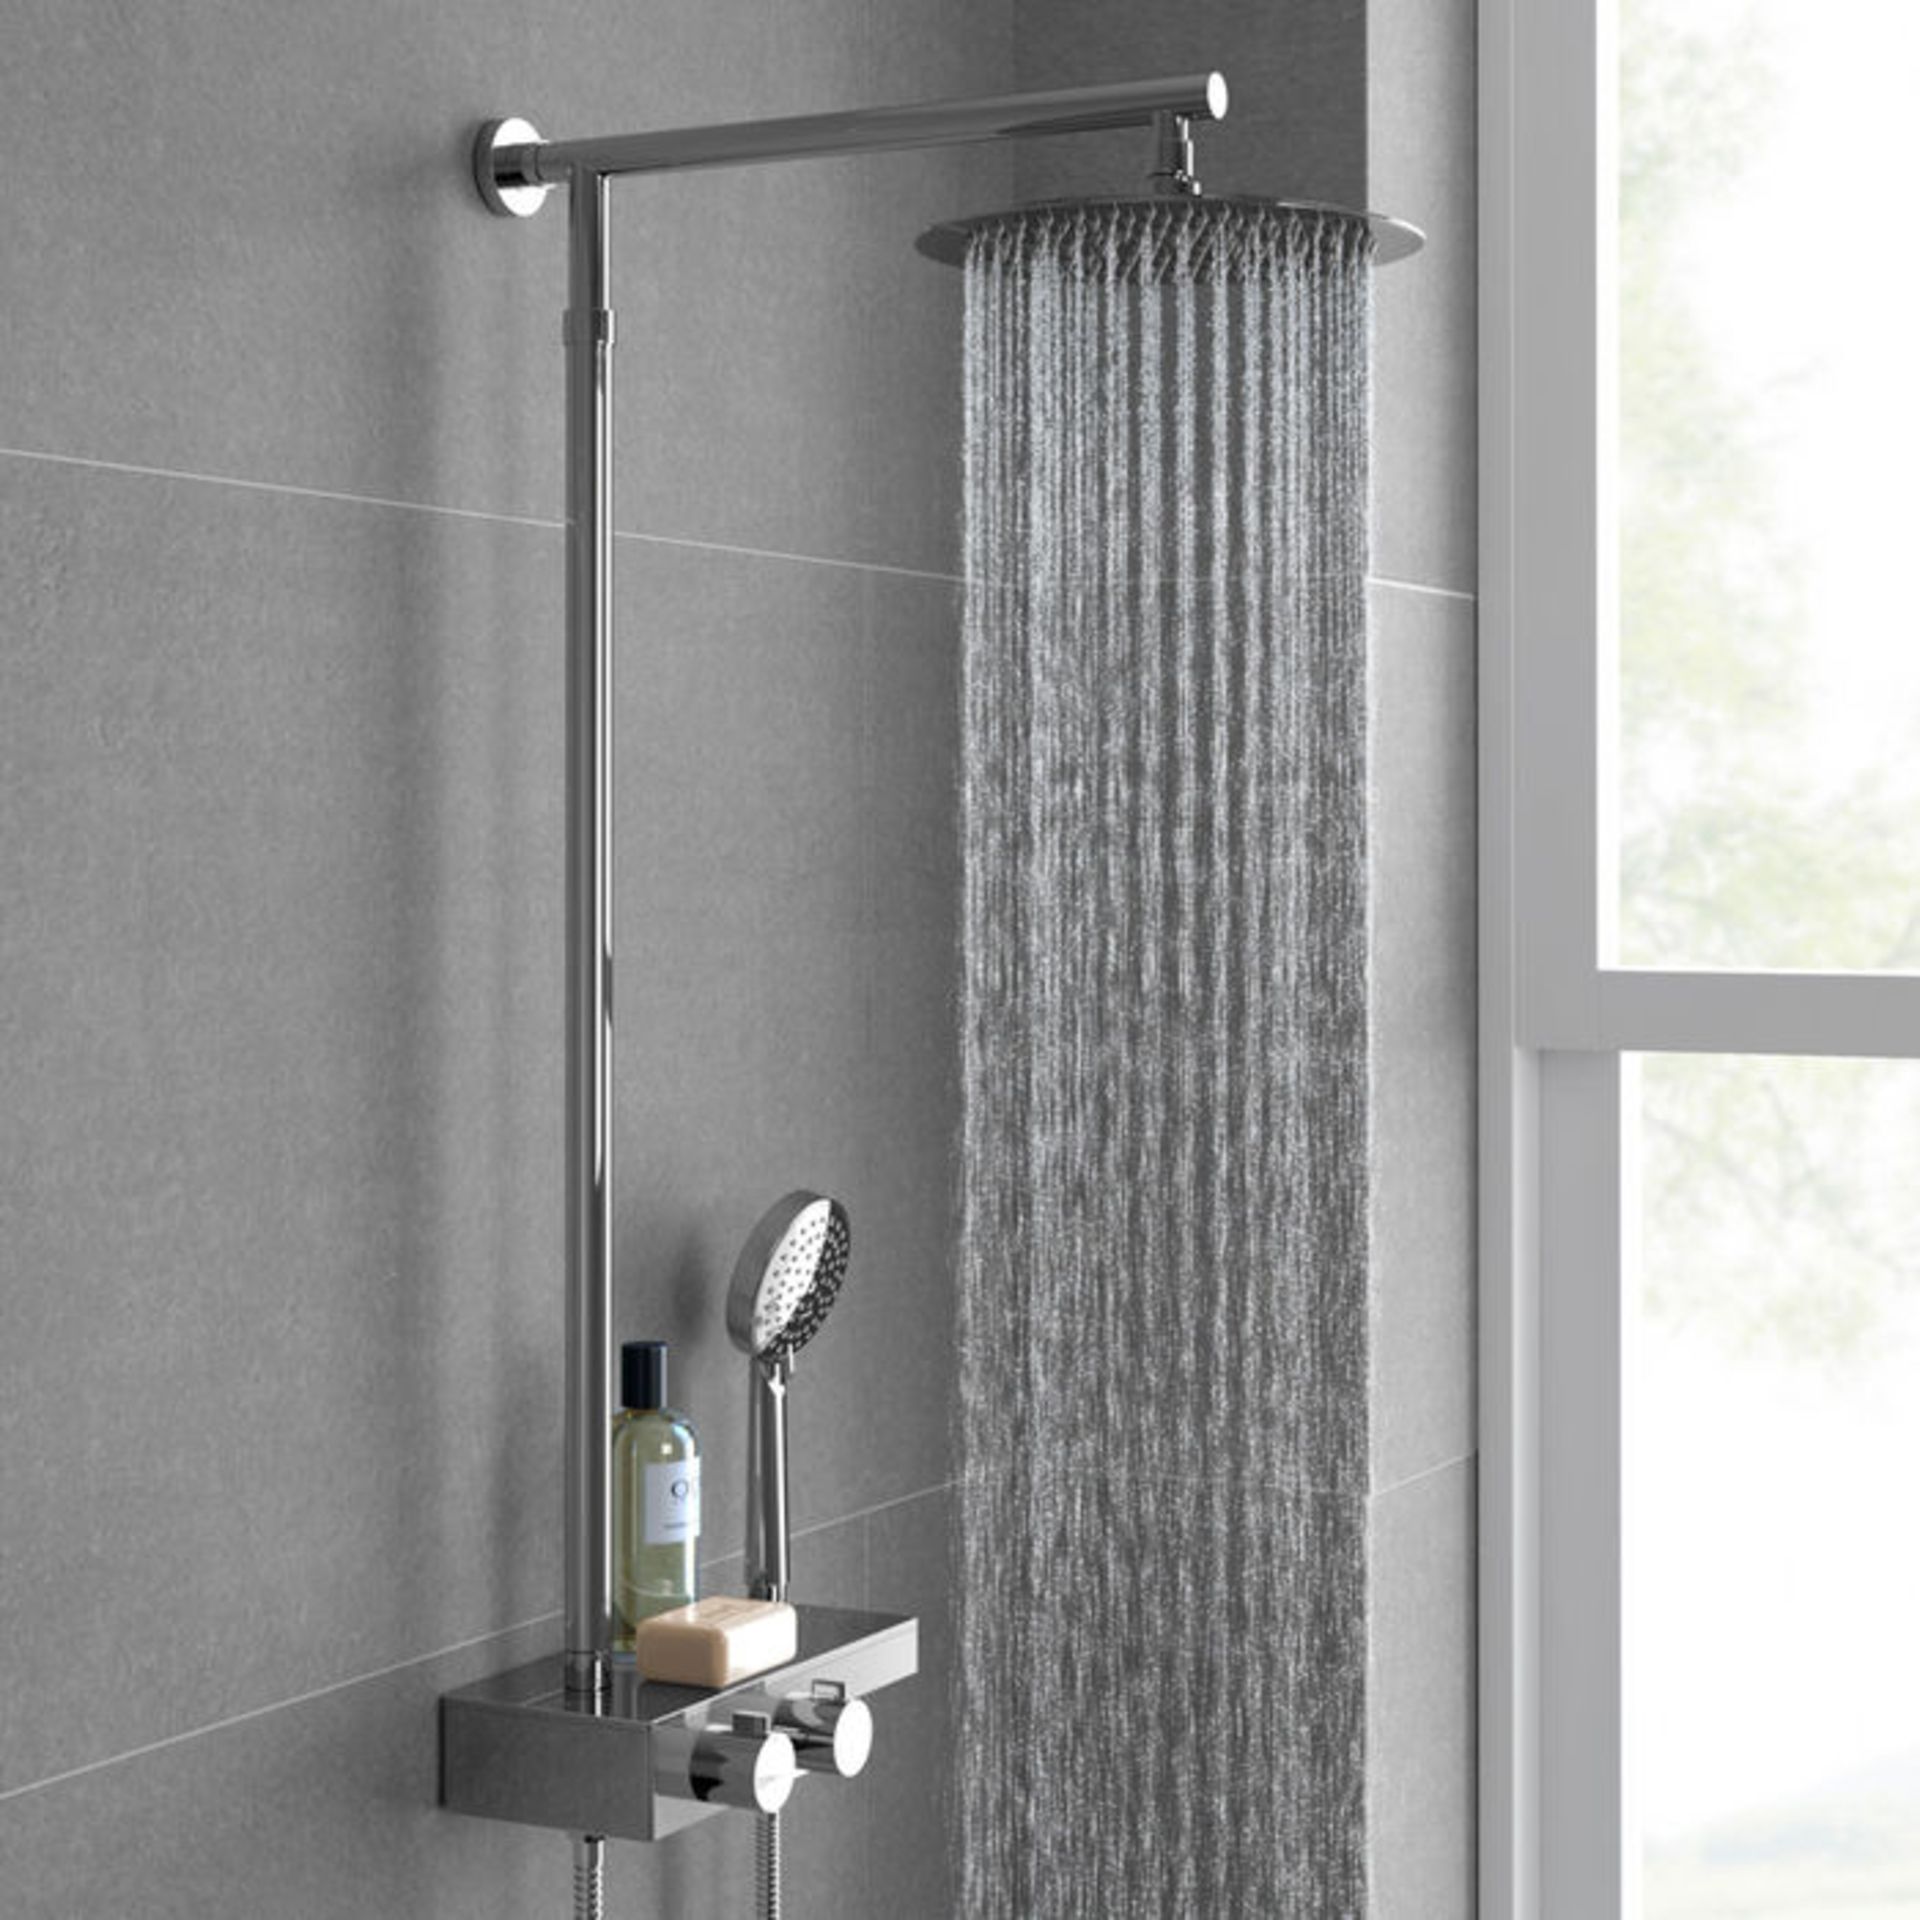 (PA37) Round Exposed Thermostatic Mixer Shower Kit & Large Head. Cool to touch shower for additional